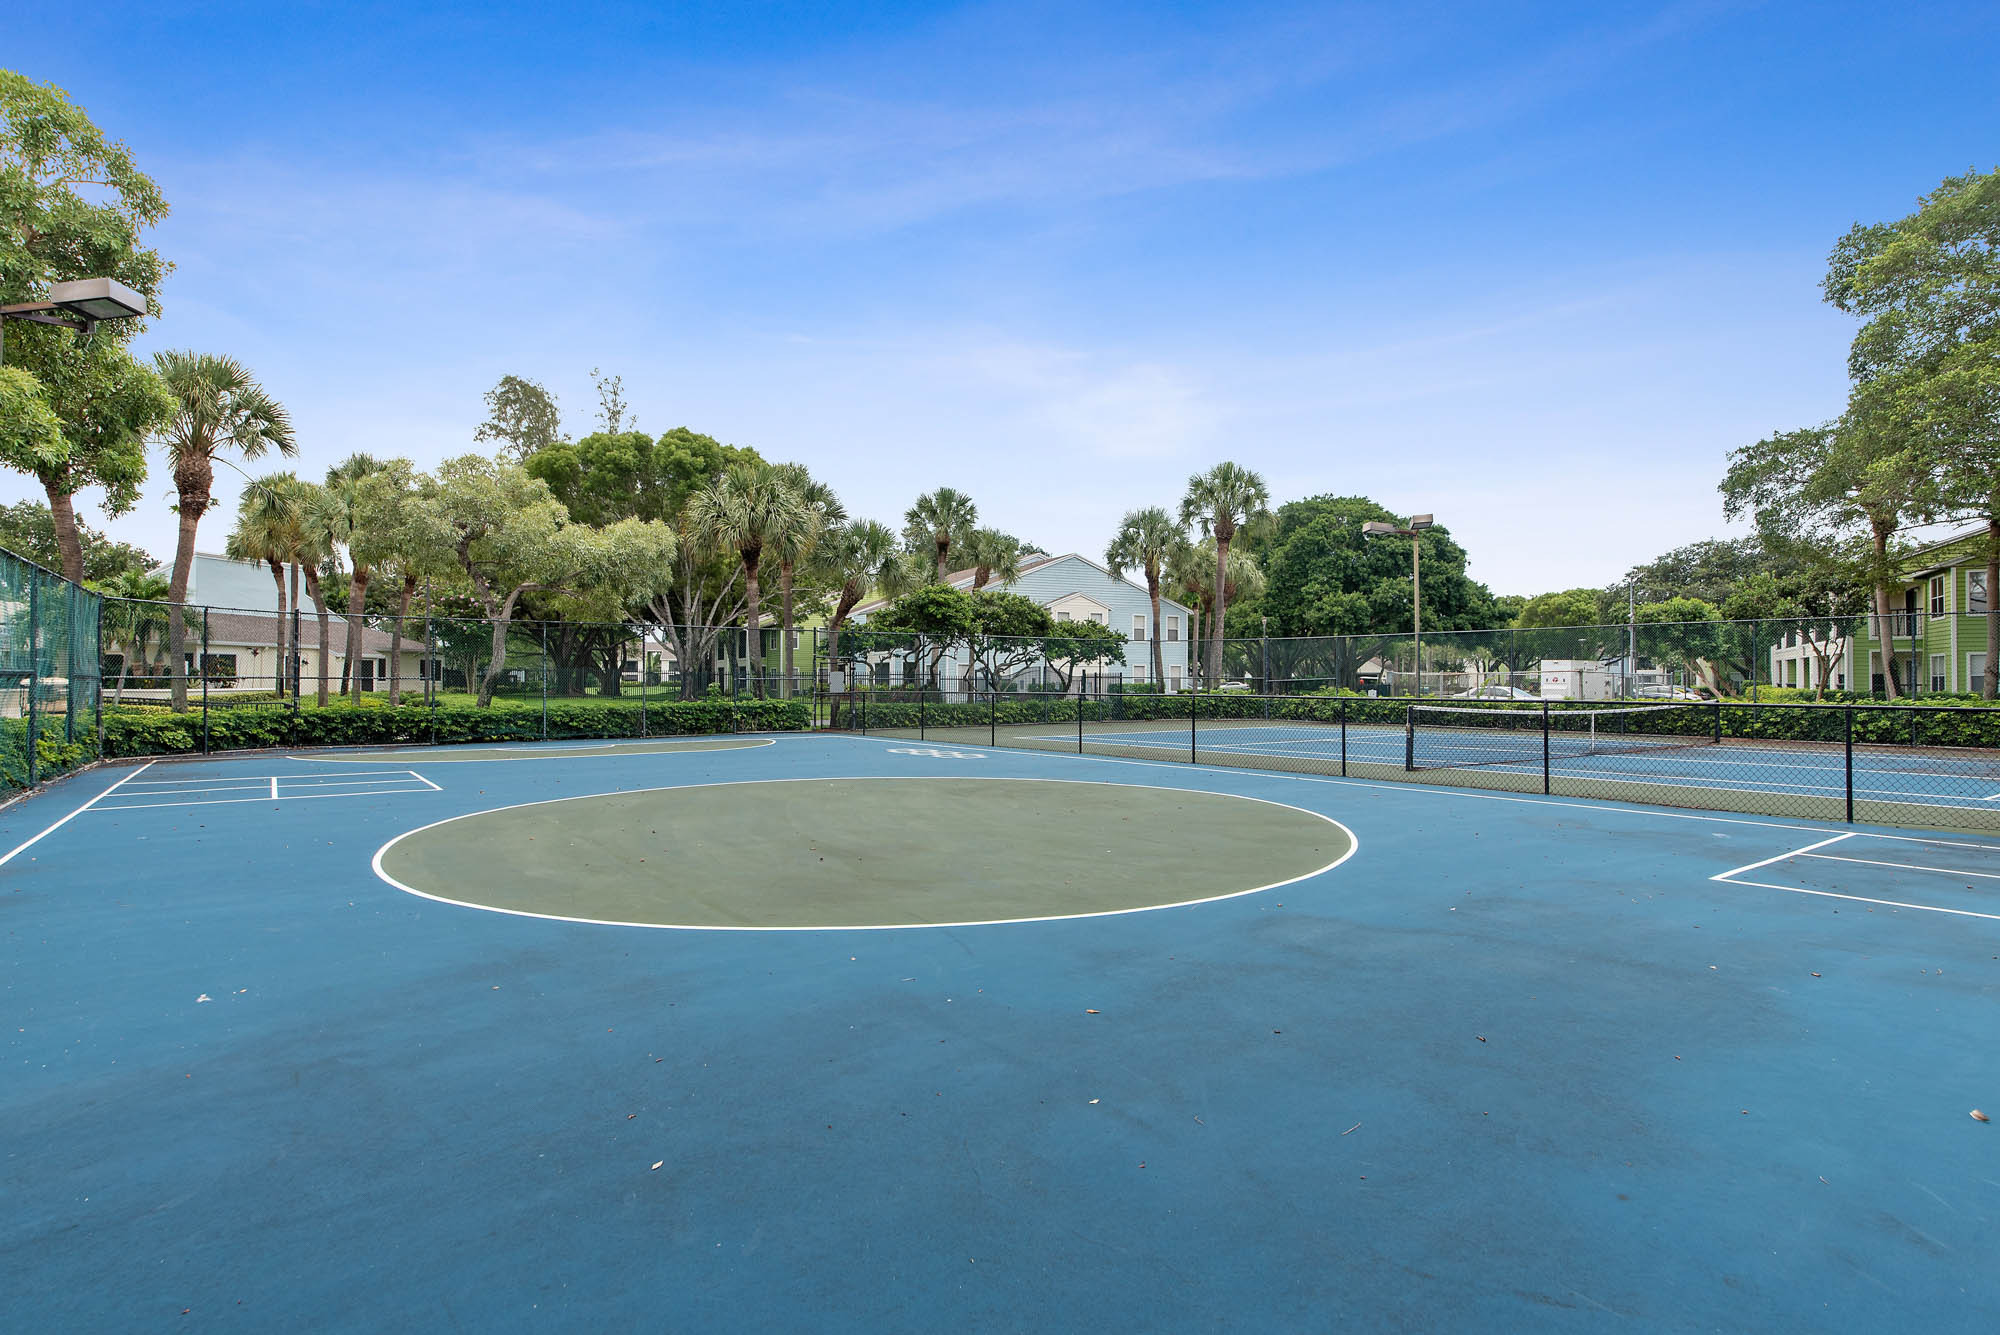 The tennis court at Turtle Cove in West Palm Beach, FL.